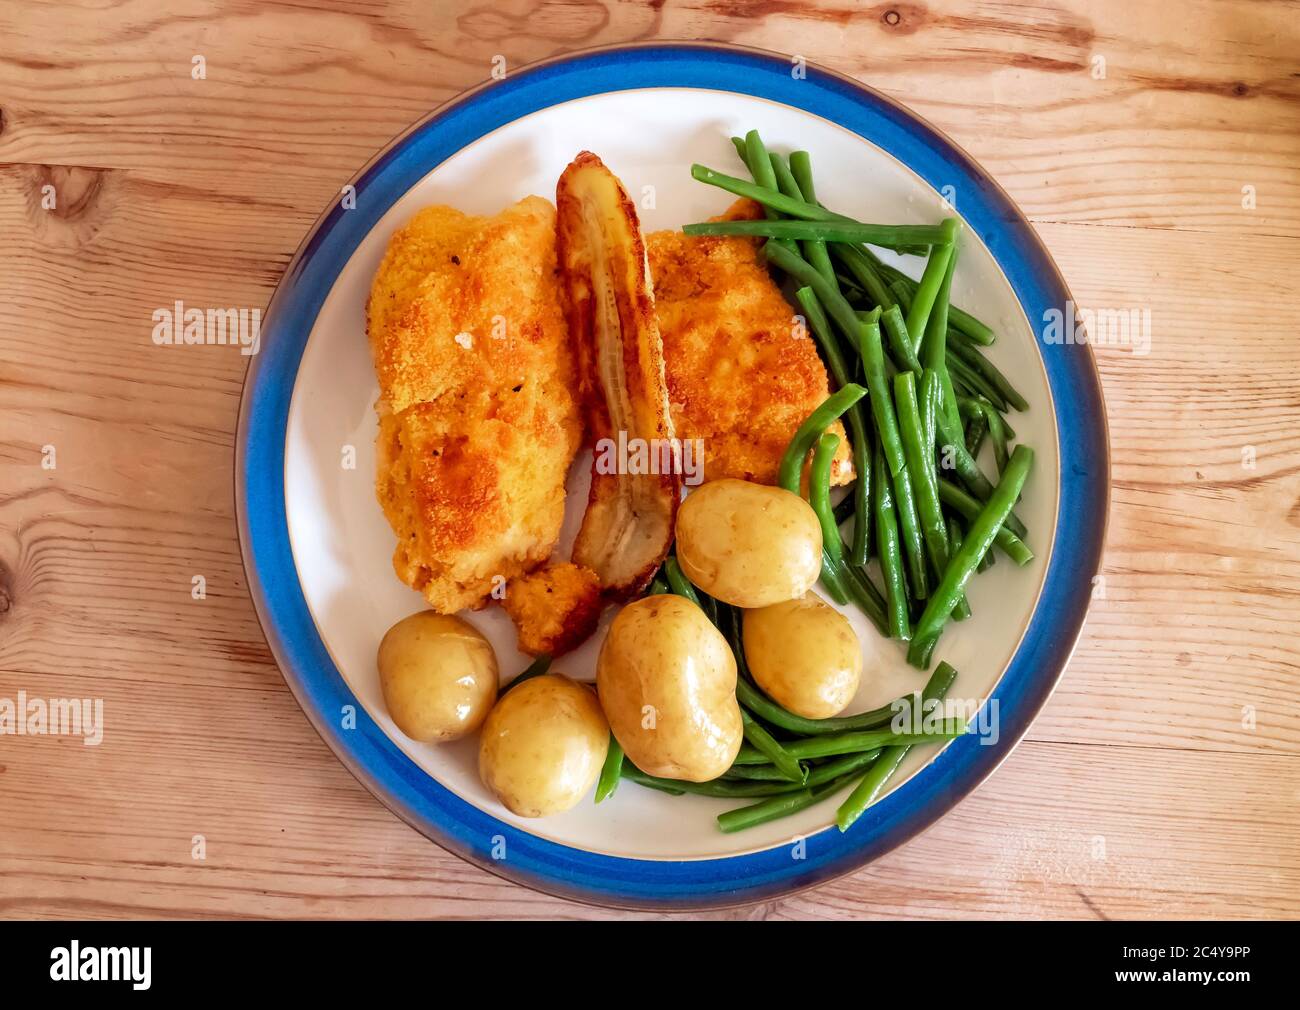 Lunch main course breaded chicken fillets with green beans new potatoes  and a fried bannana white plate blue edge wooden table top Stock Photo